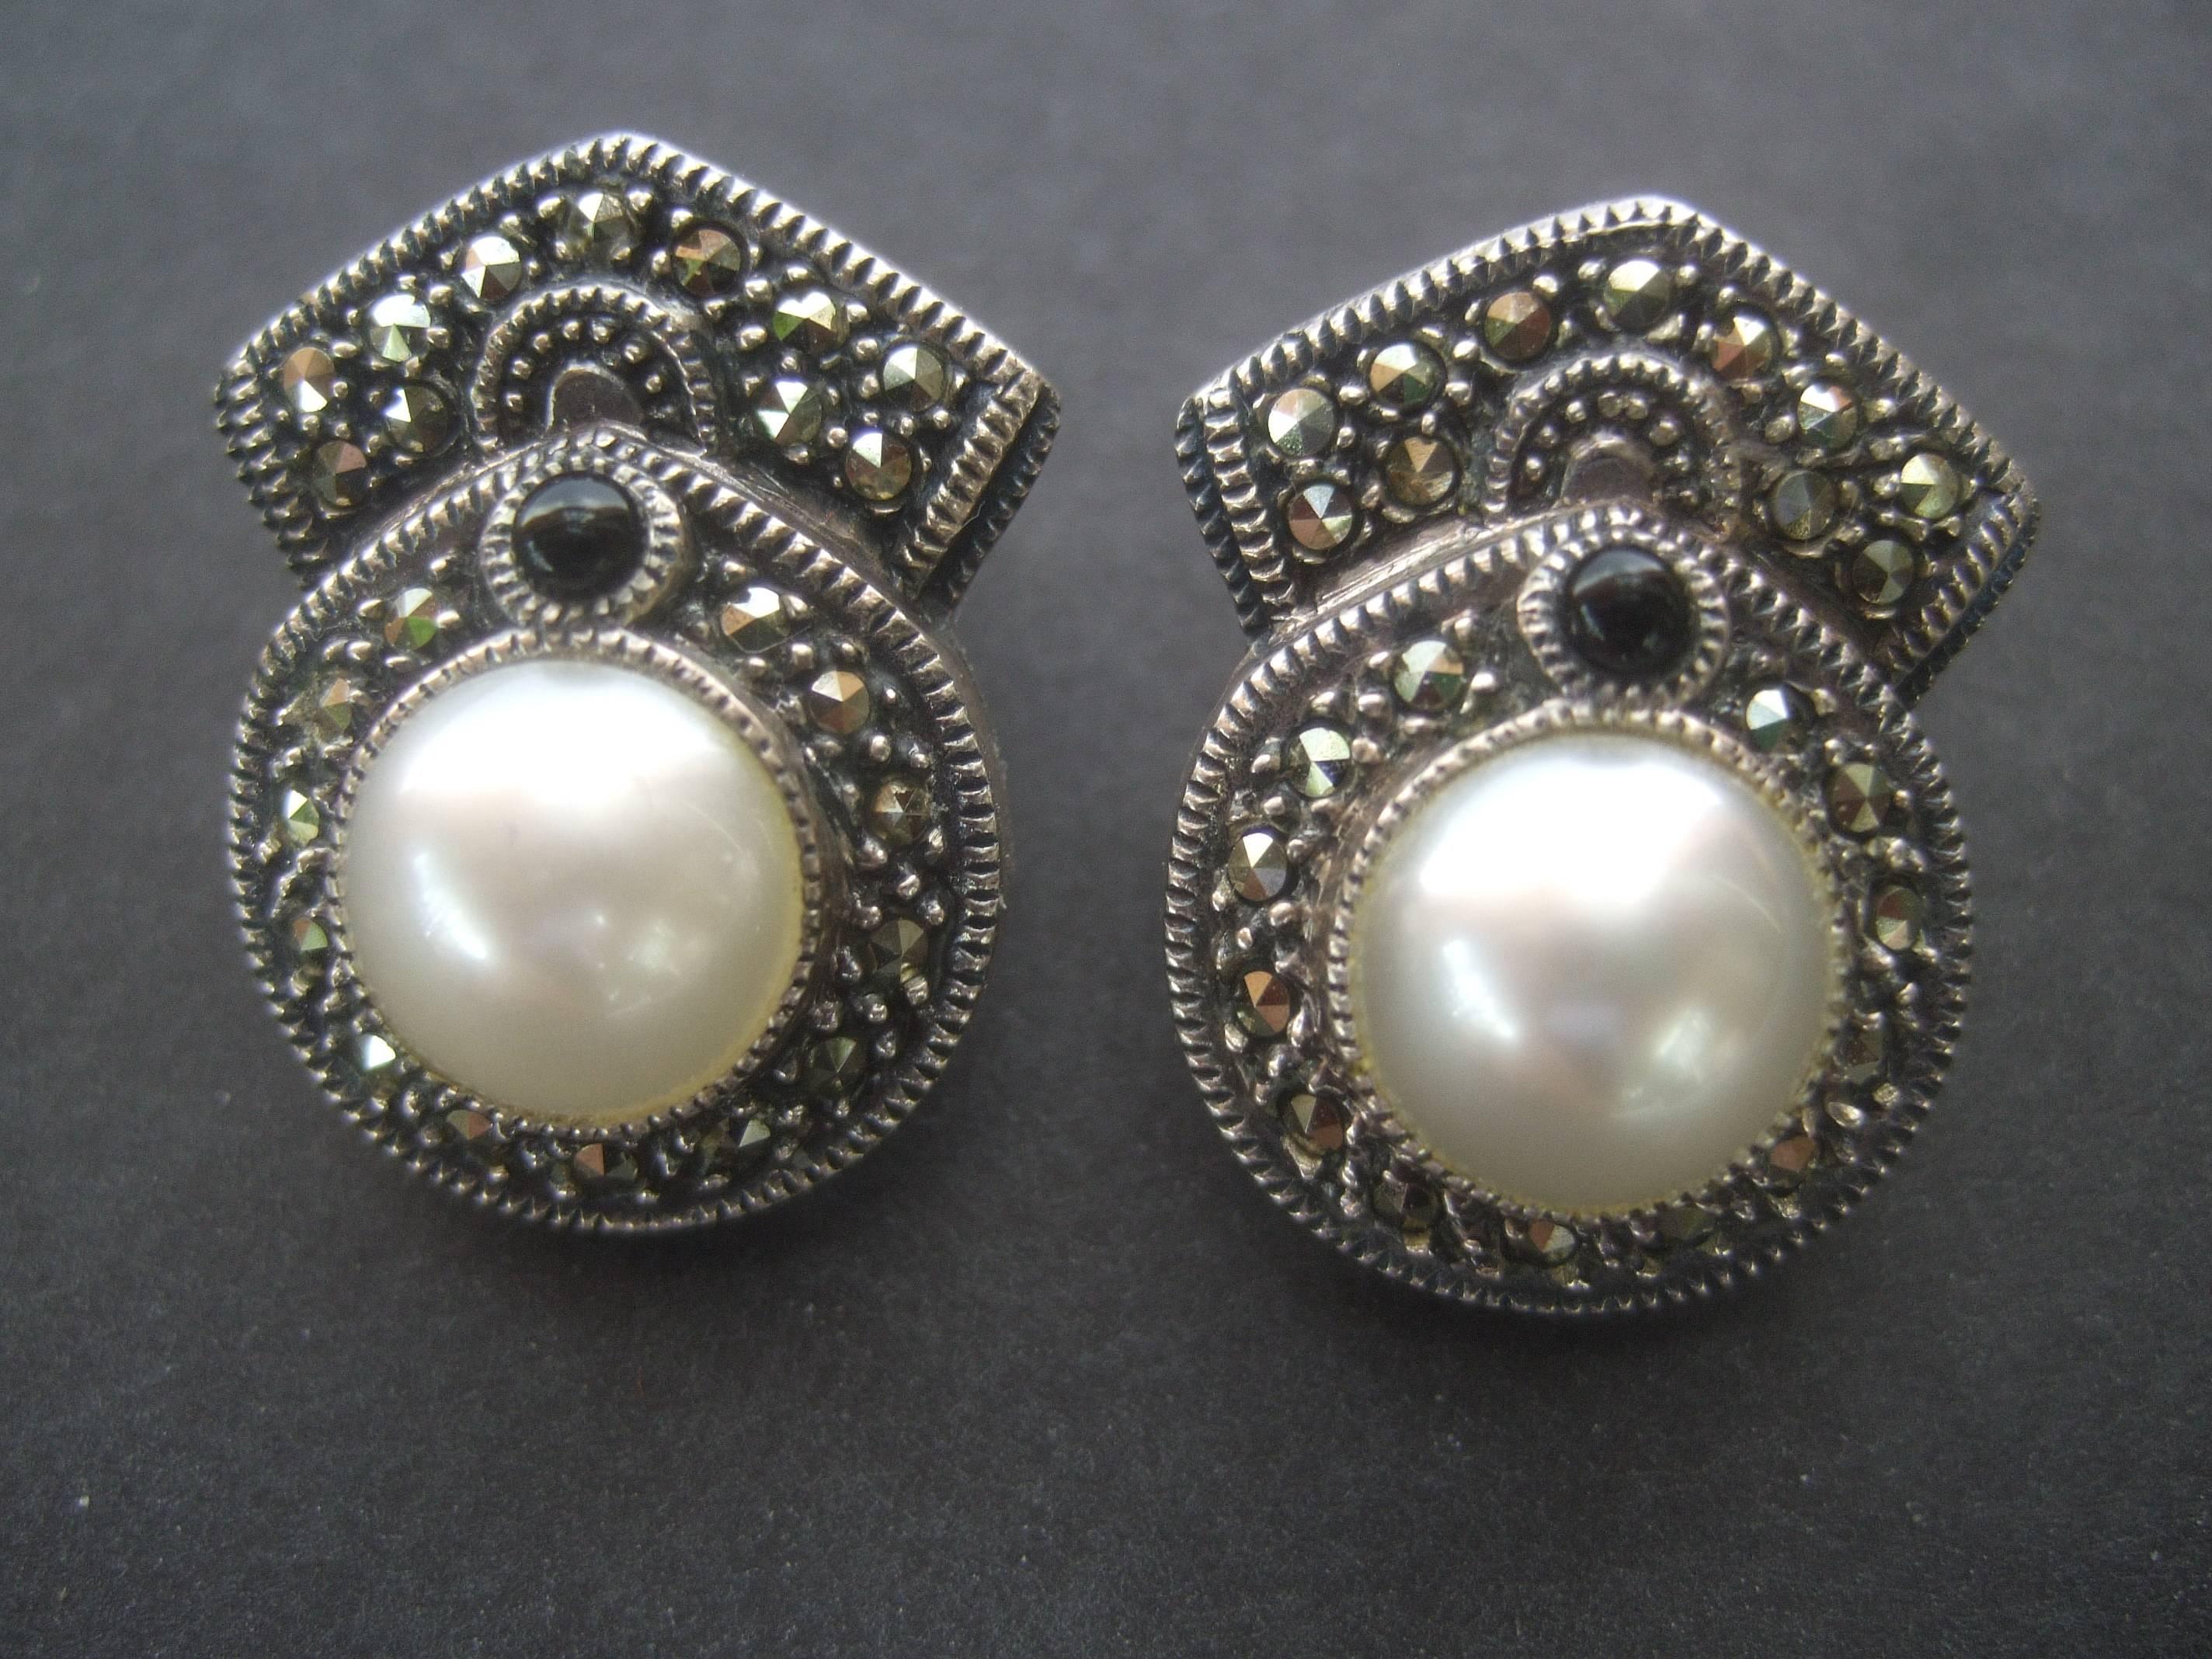 Judith Jack Opulent sterling marcasite pearl earrings
The elegant sterling clip on earrings are encrusted 
glitterling marcasite crystals

The center is adorned with a glass enamel pearl
with a single jet crystal. The designer earrings 
while